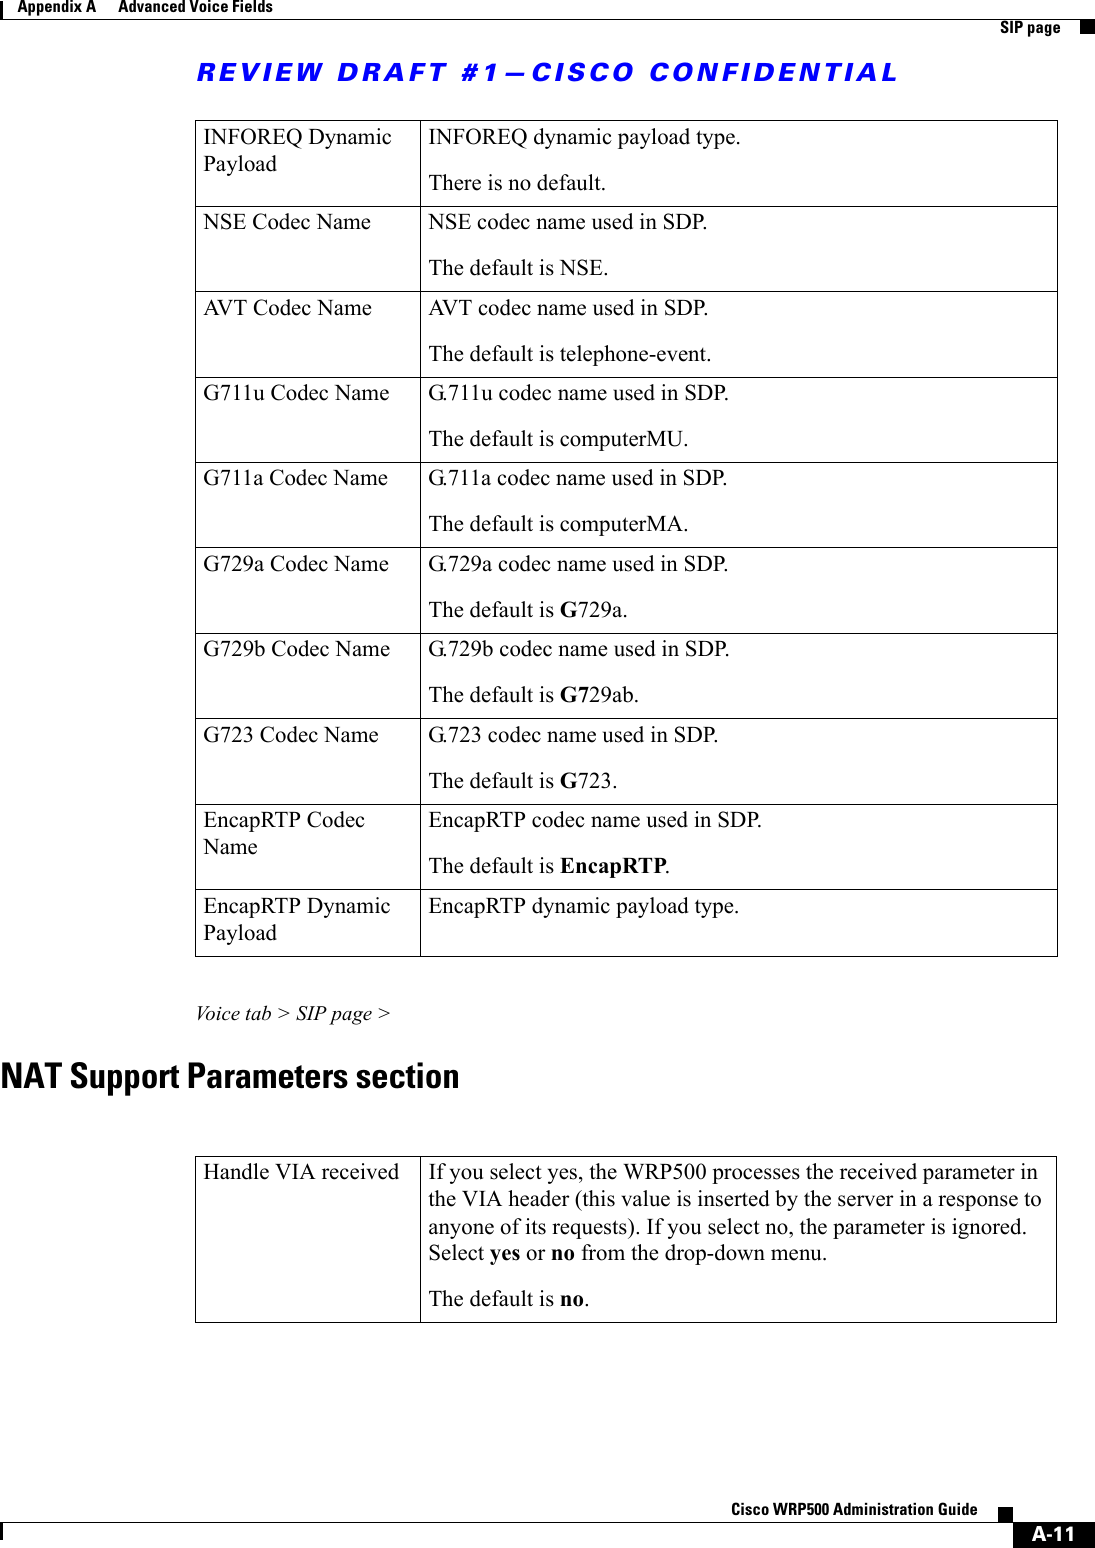 REVIEW DRAFT #1—CISCO CONFIDENTIALA-11Cisco WRP500 Administration Guide Appendix A      Advanced Voice Fields  SIP pageVoice tab &gt; SIP page &gt;NAT Support Parameters sectionINFOREQ Dynamic Payload INFOREQ dynamic payload type. There is no default.NSE Codec Name  NSE codec name used in SDP. The default is NSE.AVT Codec Name  AVT codec name used in SDP. The default is telephone-event.G711u Codec Name  G.711u codec name used in SDP. The default is computerMU.G711a Codec Name  G.711a codec name used in SDP. The default is computerMA.G729a Codec Name  G.729a codec name used in SDP.The default is G729a.G729b Codec Name  G.729b codec name used in SDP.The default is G729ab.G723 Codec Name  G.723 codec name used in SDP.The default is G723.EncapRTP Codec NameEncapRTP codec name used in SDP.The default is EncapRTP.EncapRTP Dynamic PayloadEncapRTP dynamic payload type.Handle VIA received  If you select yes, the WRP500 processes the received parameter in the VIA header (this value is inserted by the server in a response to anyone of its requests). If you select no, the parameter is ignored. Select yes or no from the drop-down menu.The default is no.